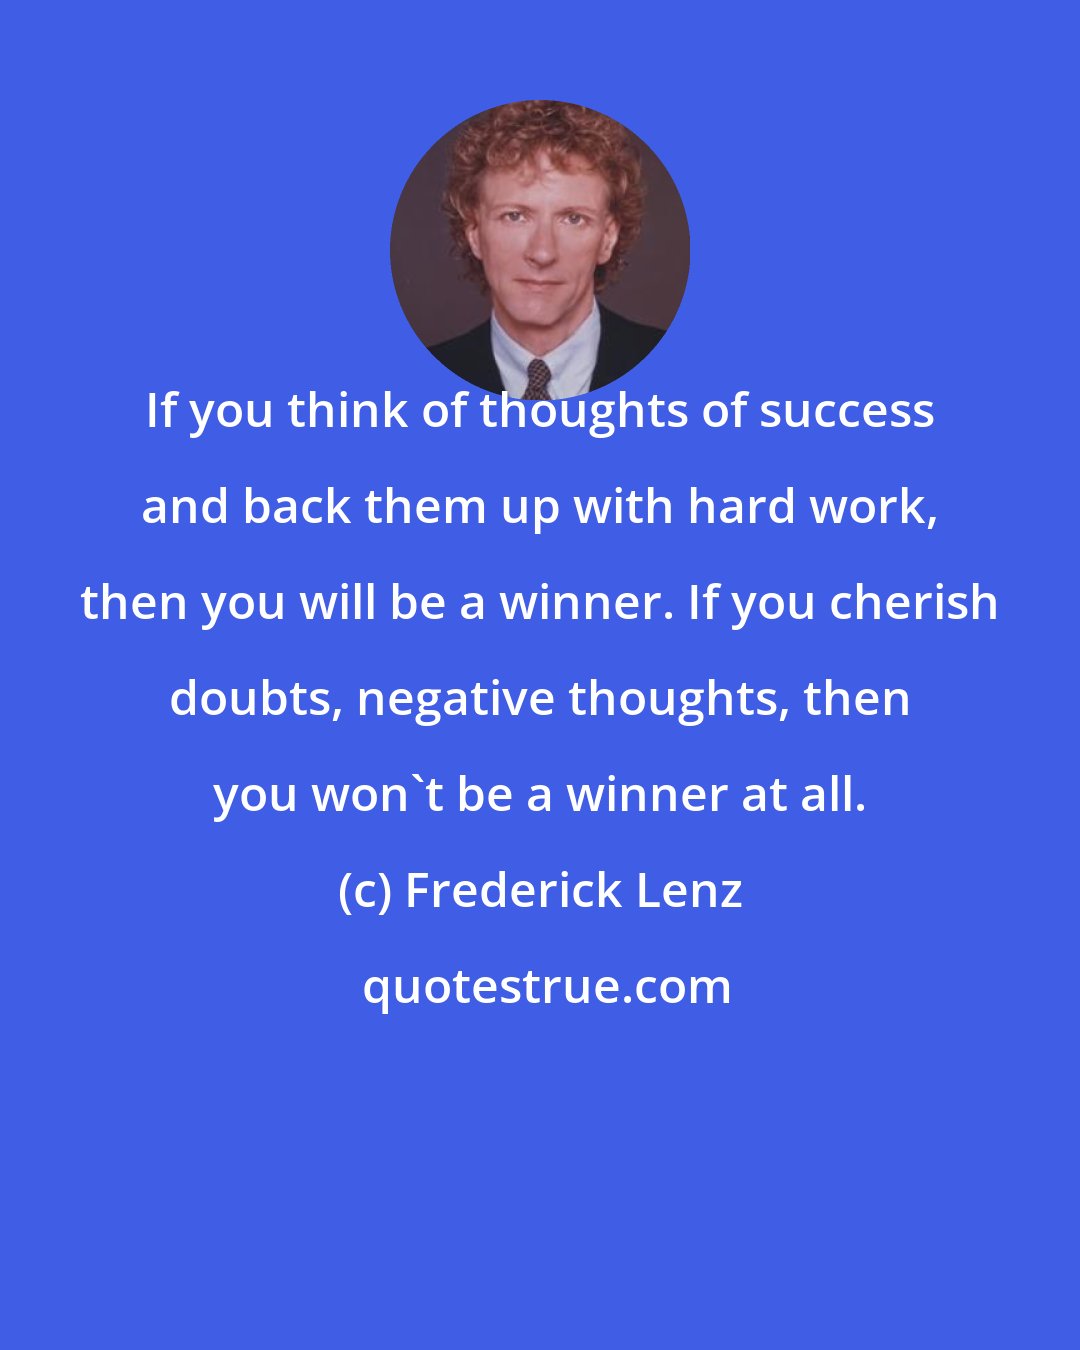 Frederick Lenz: If you think of thoughts of success and back them up with hard work, then you will be a winner. If you cherish doubts, negative thoughts, then you won't be a winner at all.